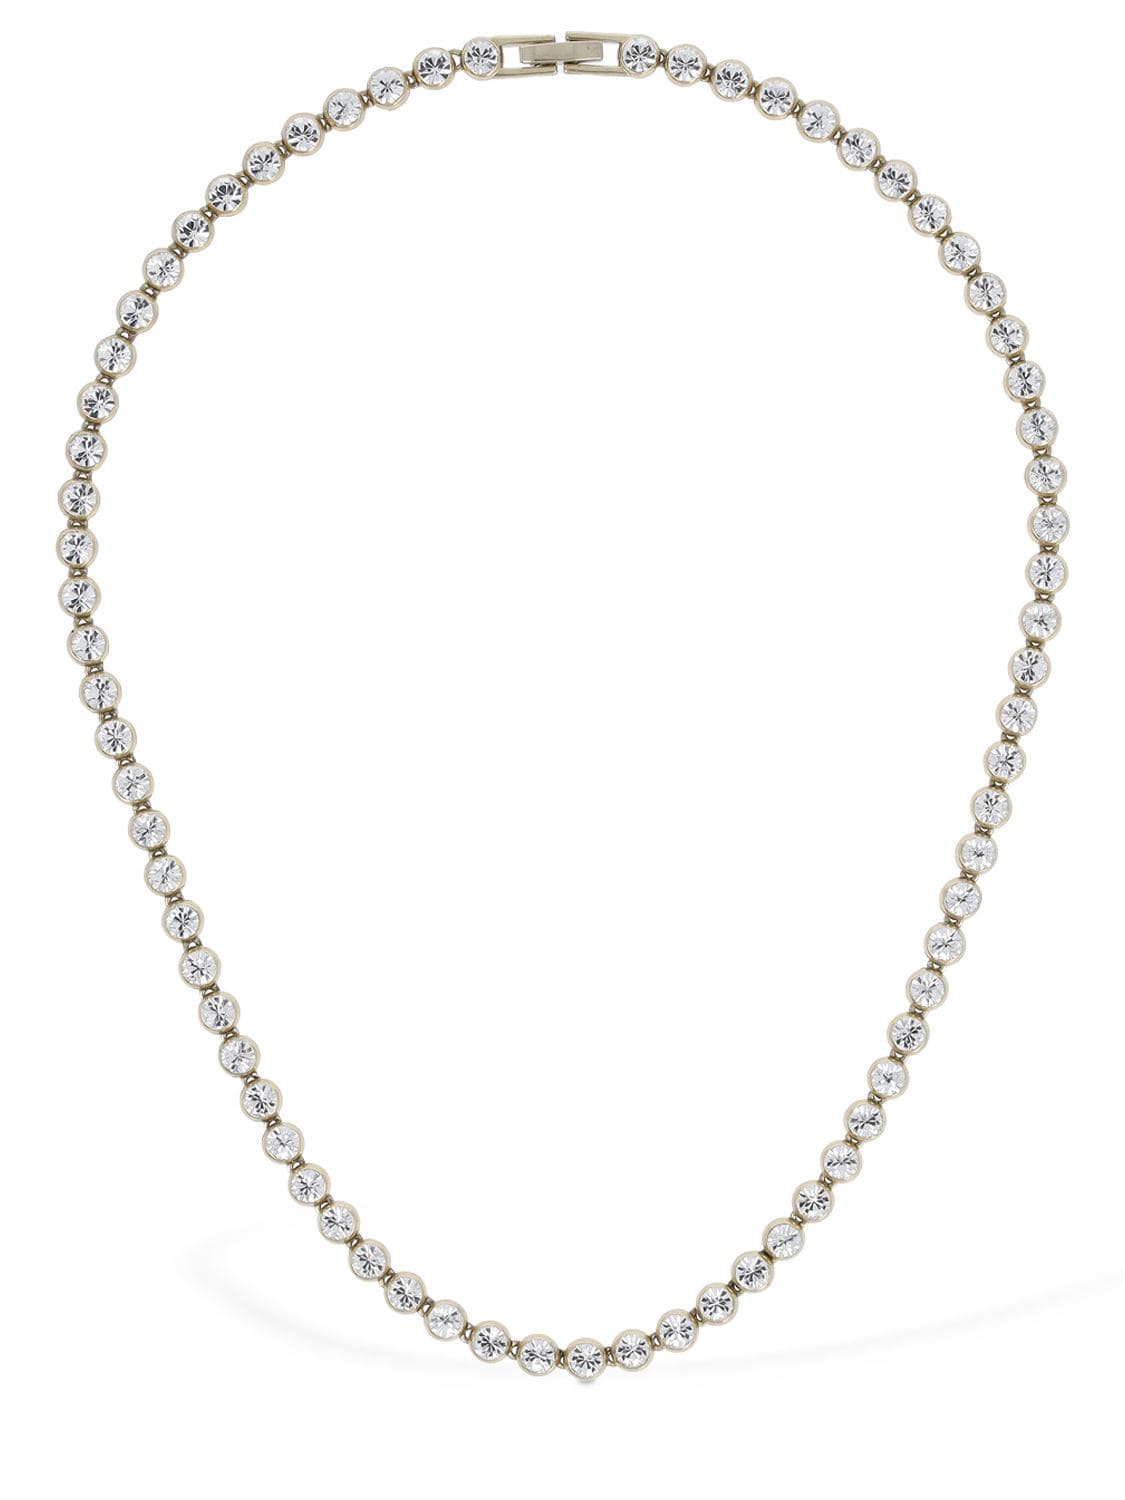 Yun Yun Sun Lvr Exclusive Beatrice Crystal Necklace In Gold